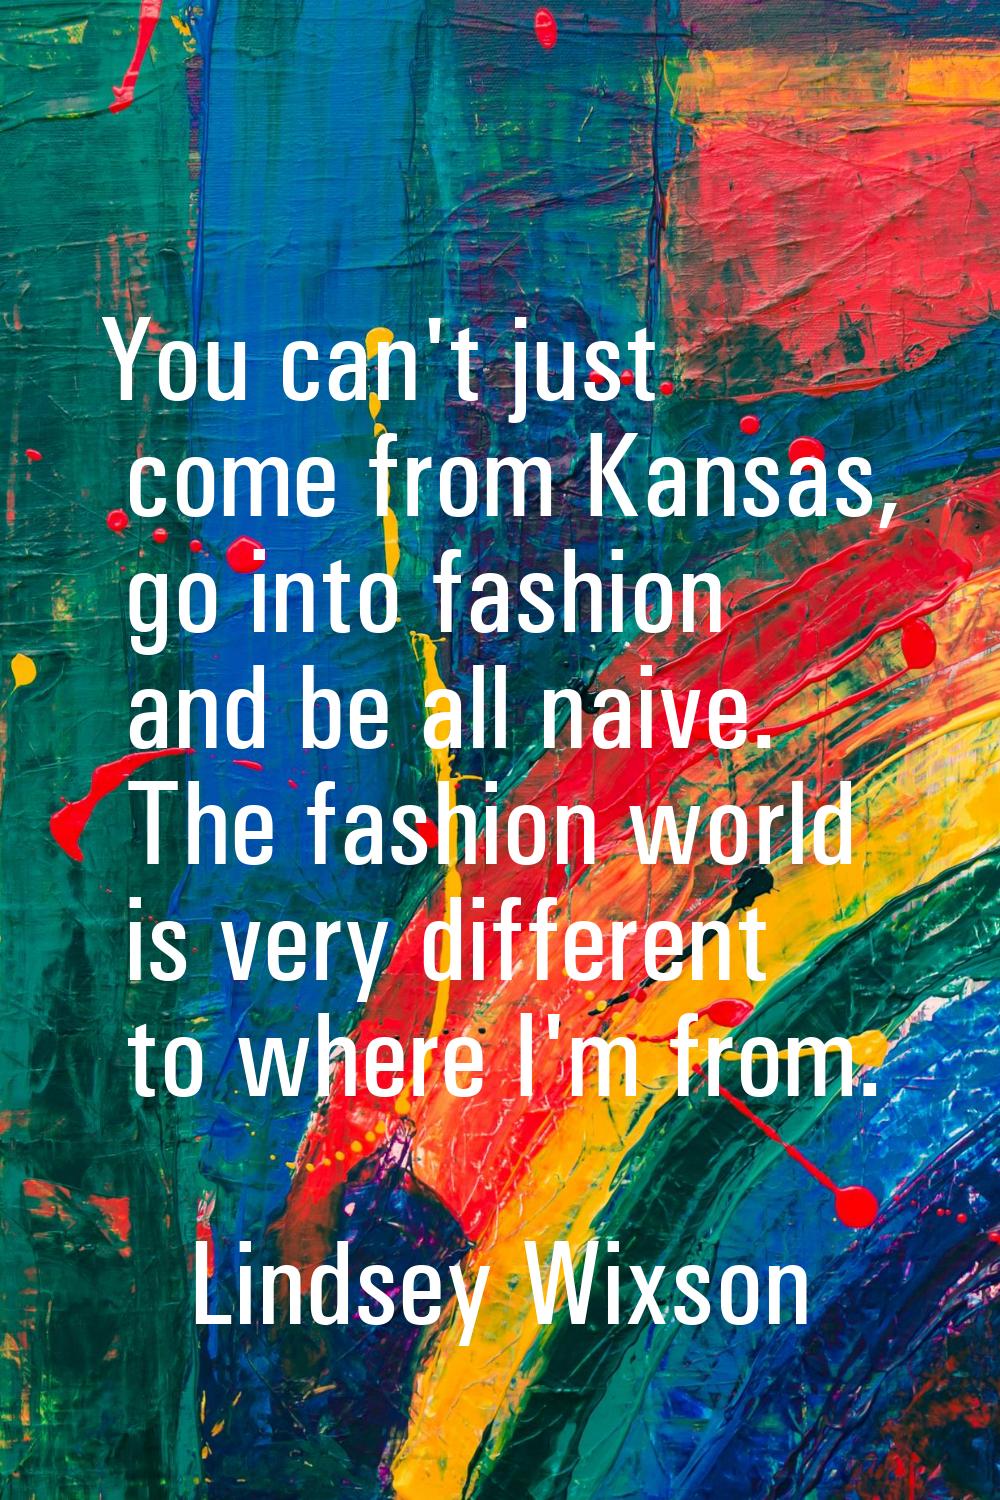 You can't just come from Kansas, go into fashion and be all naive. The fashion world is very differ